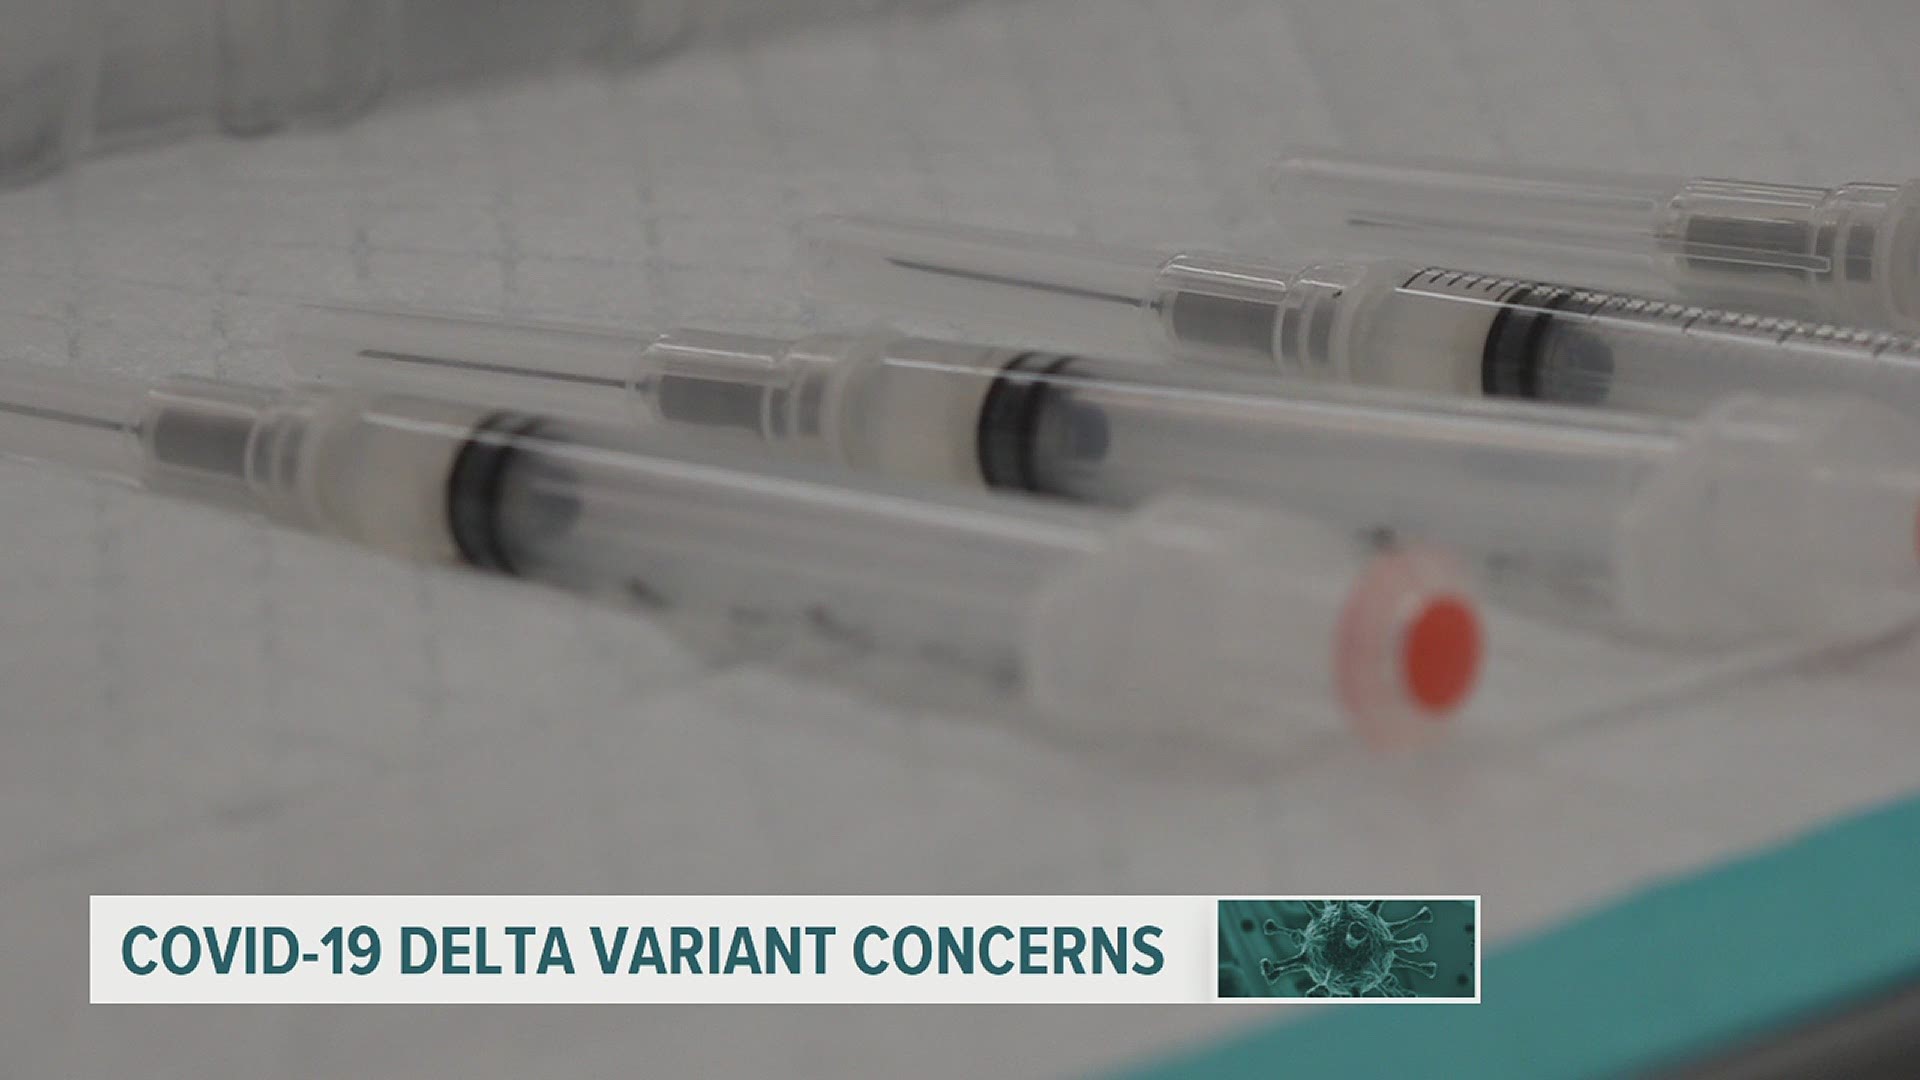 New studies are looking at the efficacy of the COVID-19 vaccines against the highly transmissible Delta Variant.